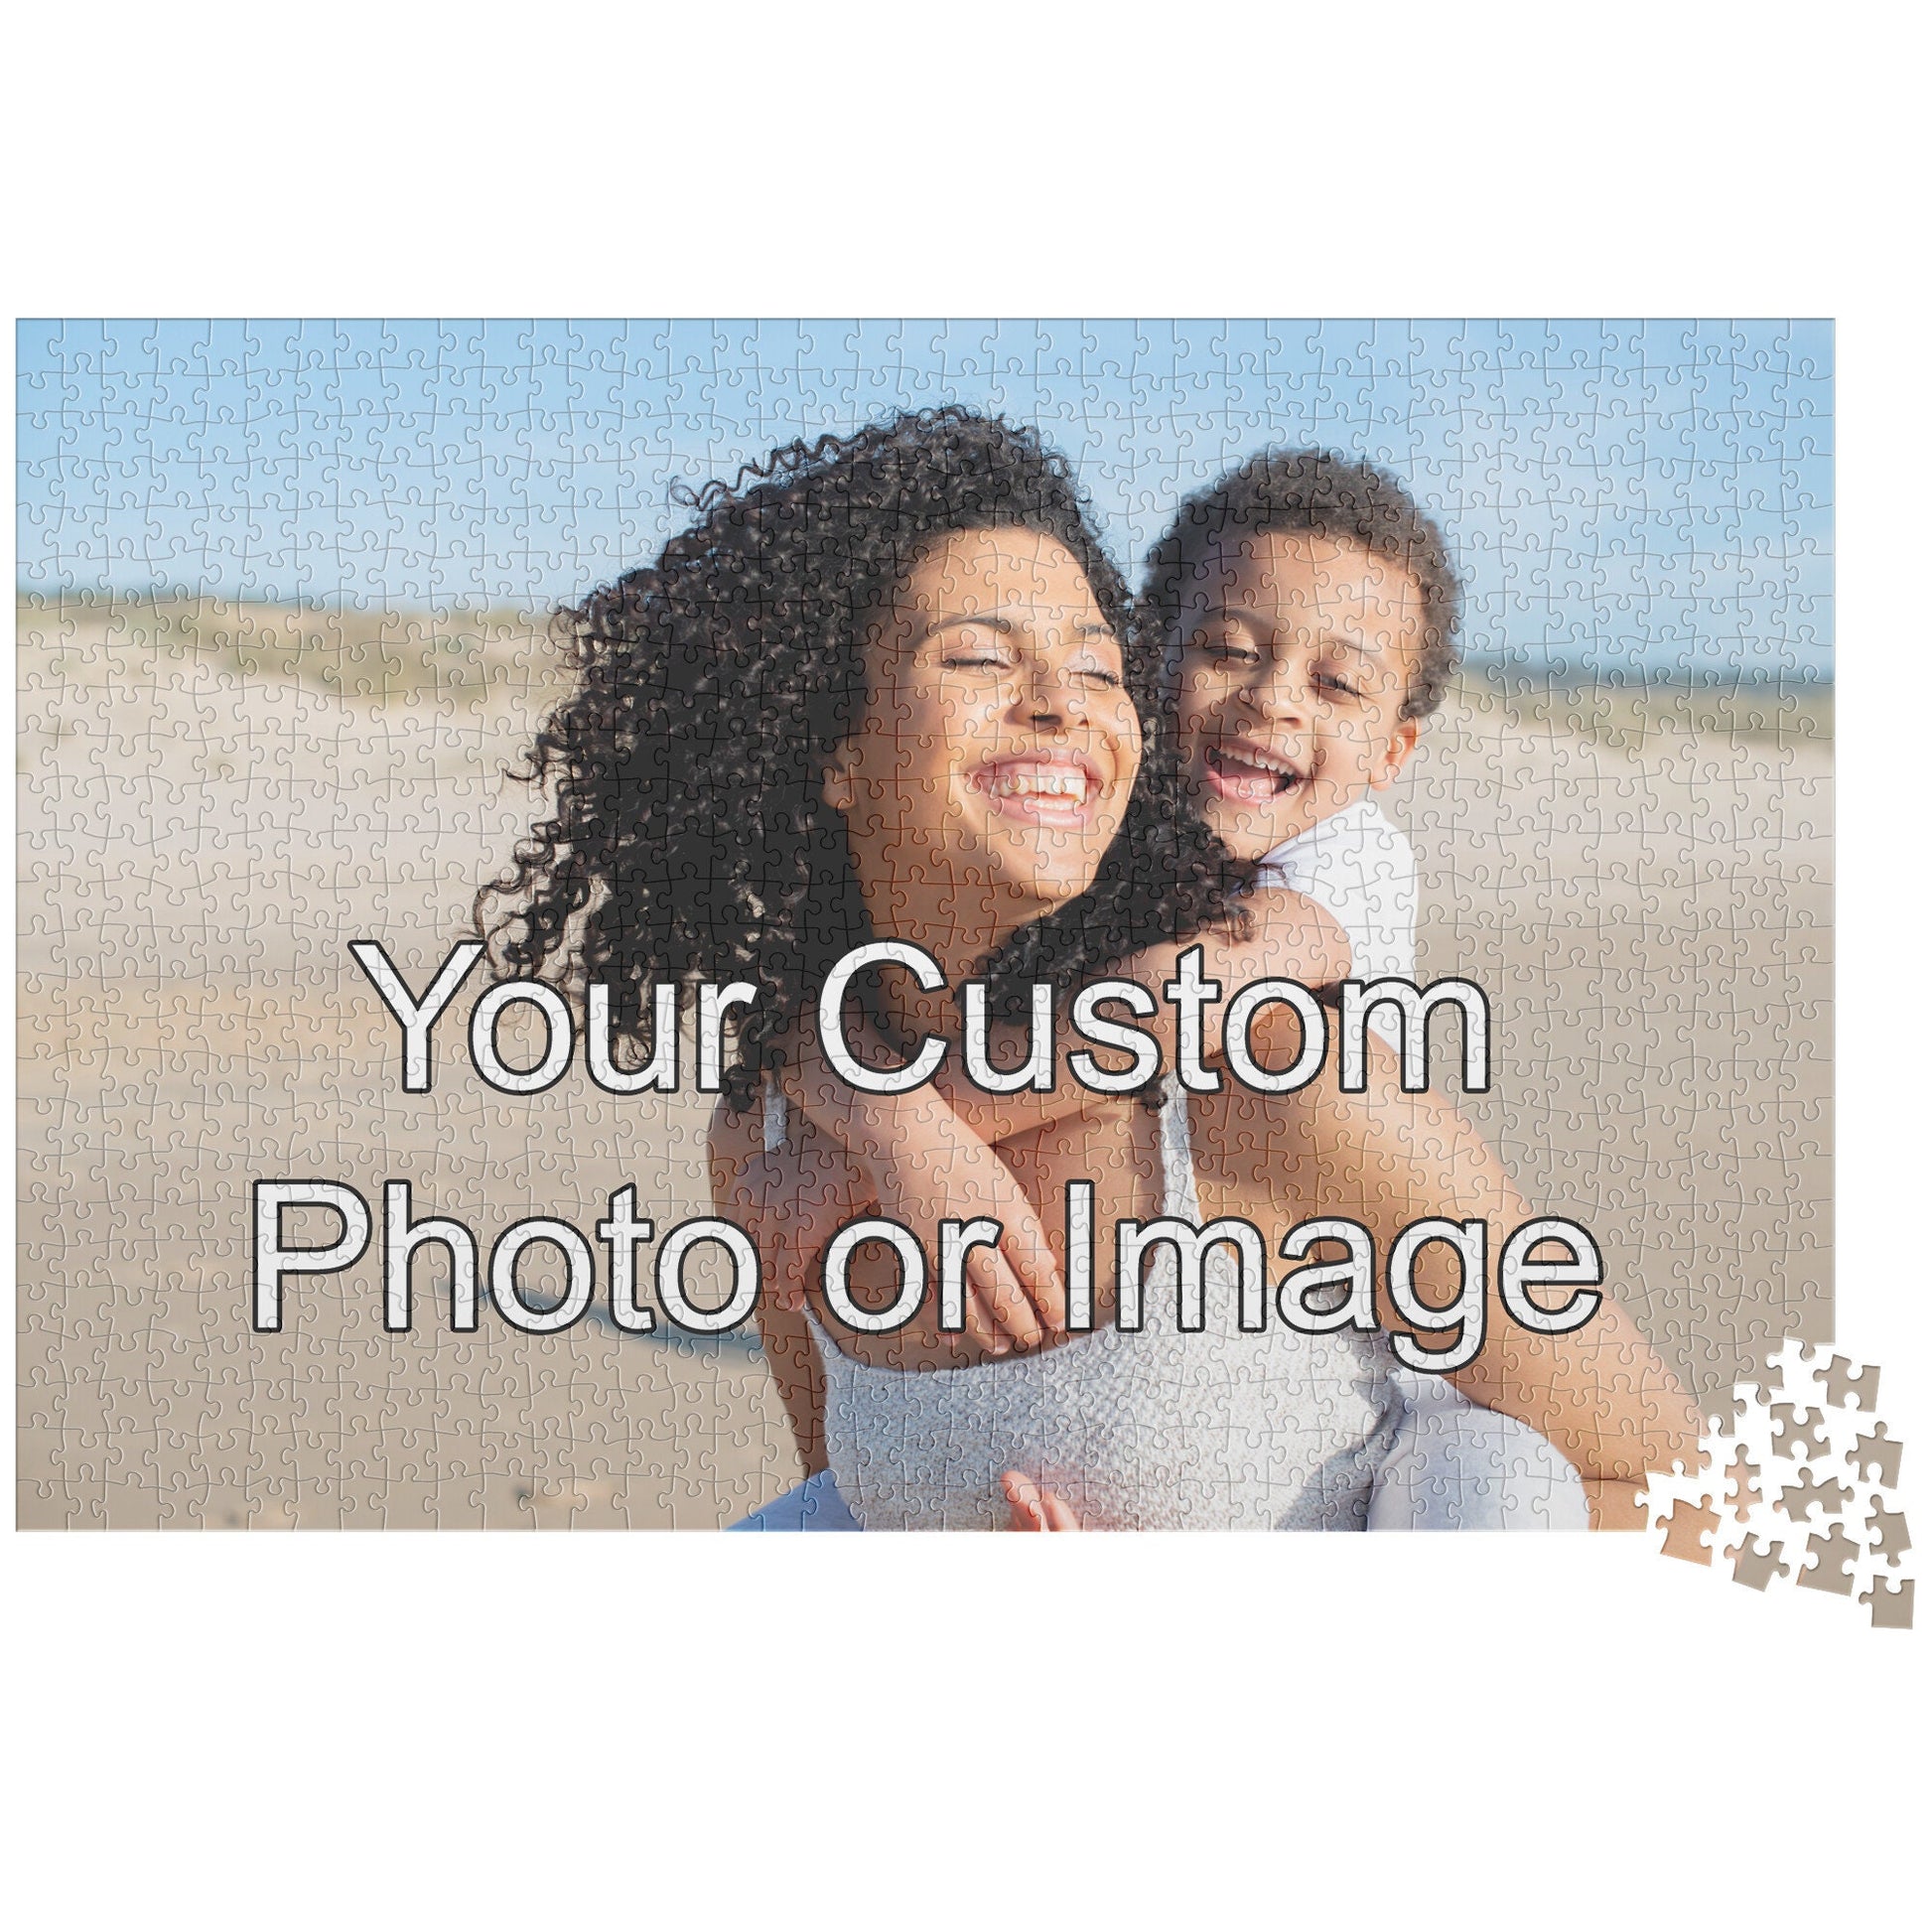 Custom Puzzle customized gifts personalized puzzles photo puzzle